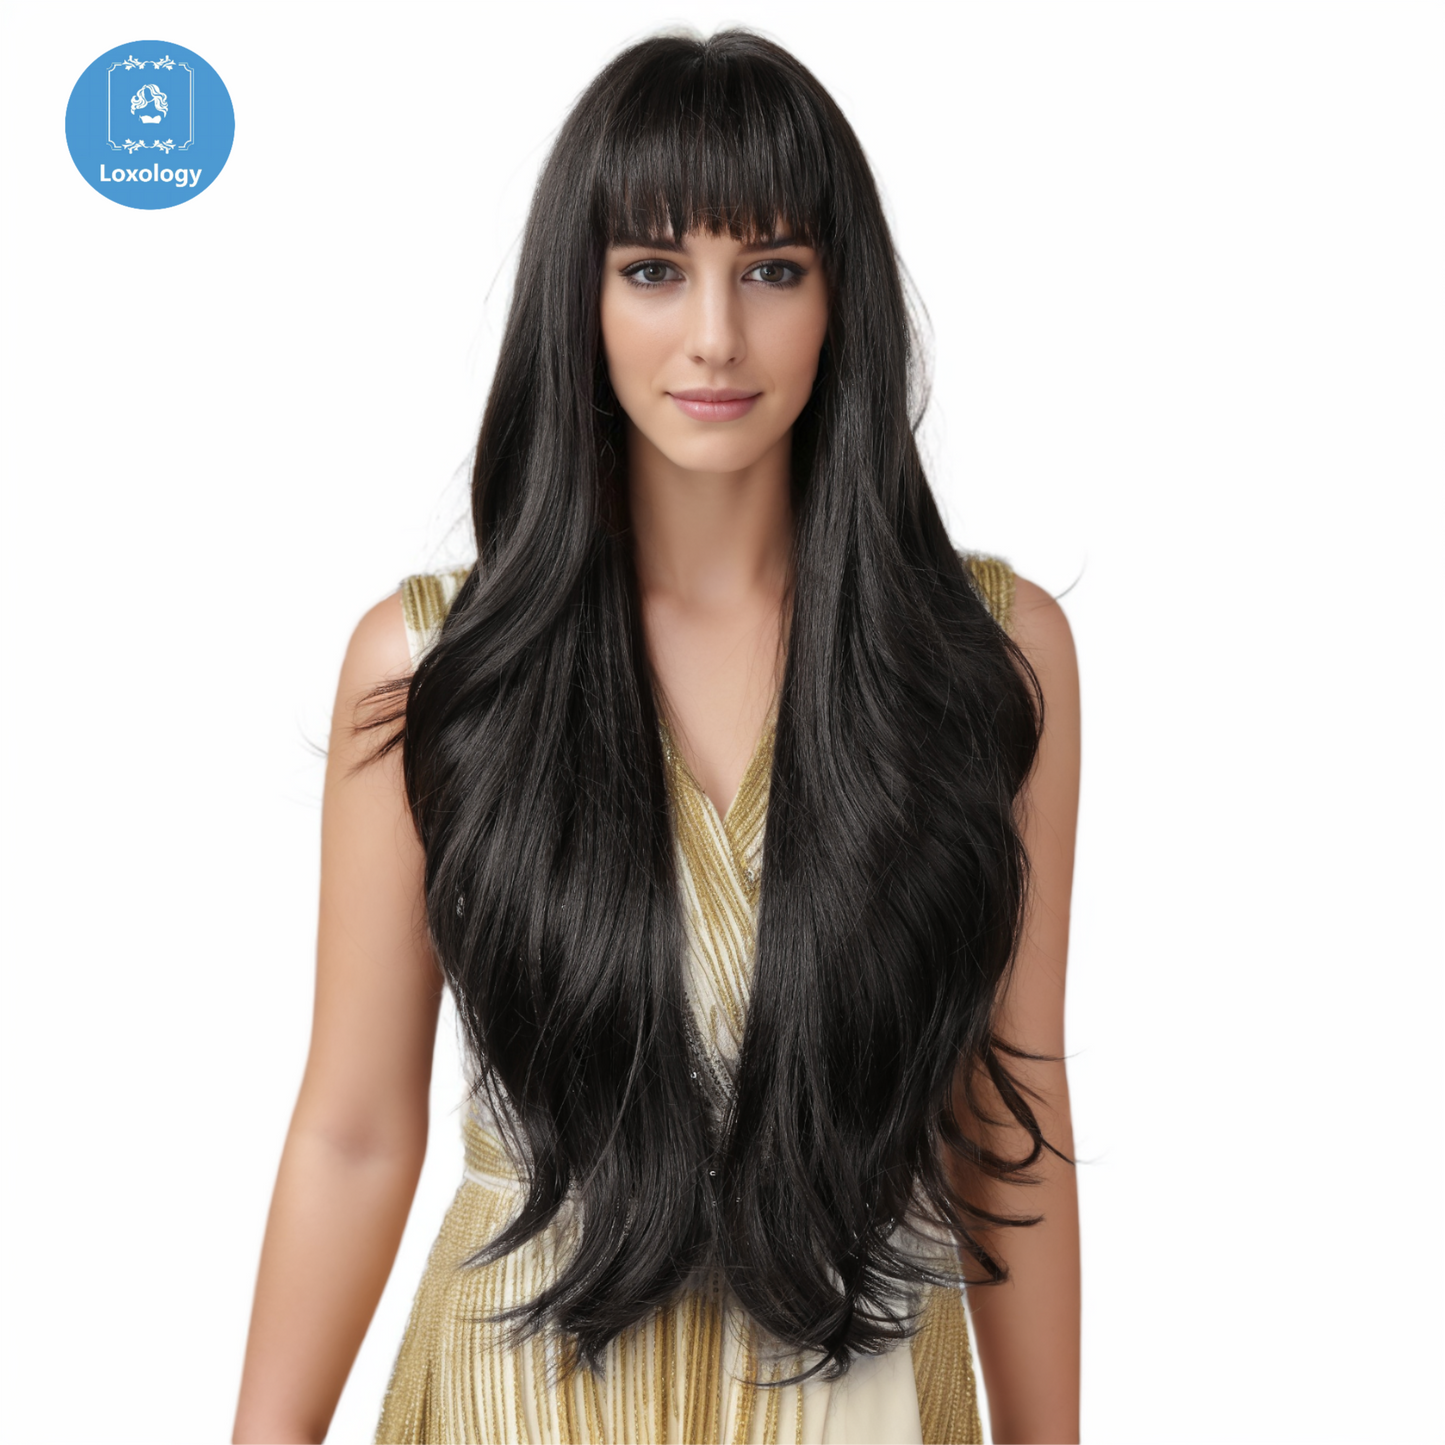 【Venne】Loxology | 28 Inches Long Curly Black Synthetic Wigs with Bangs Women wigs